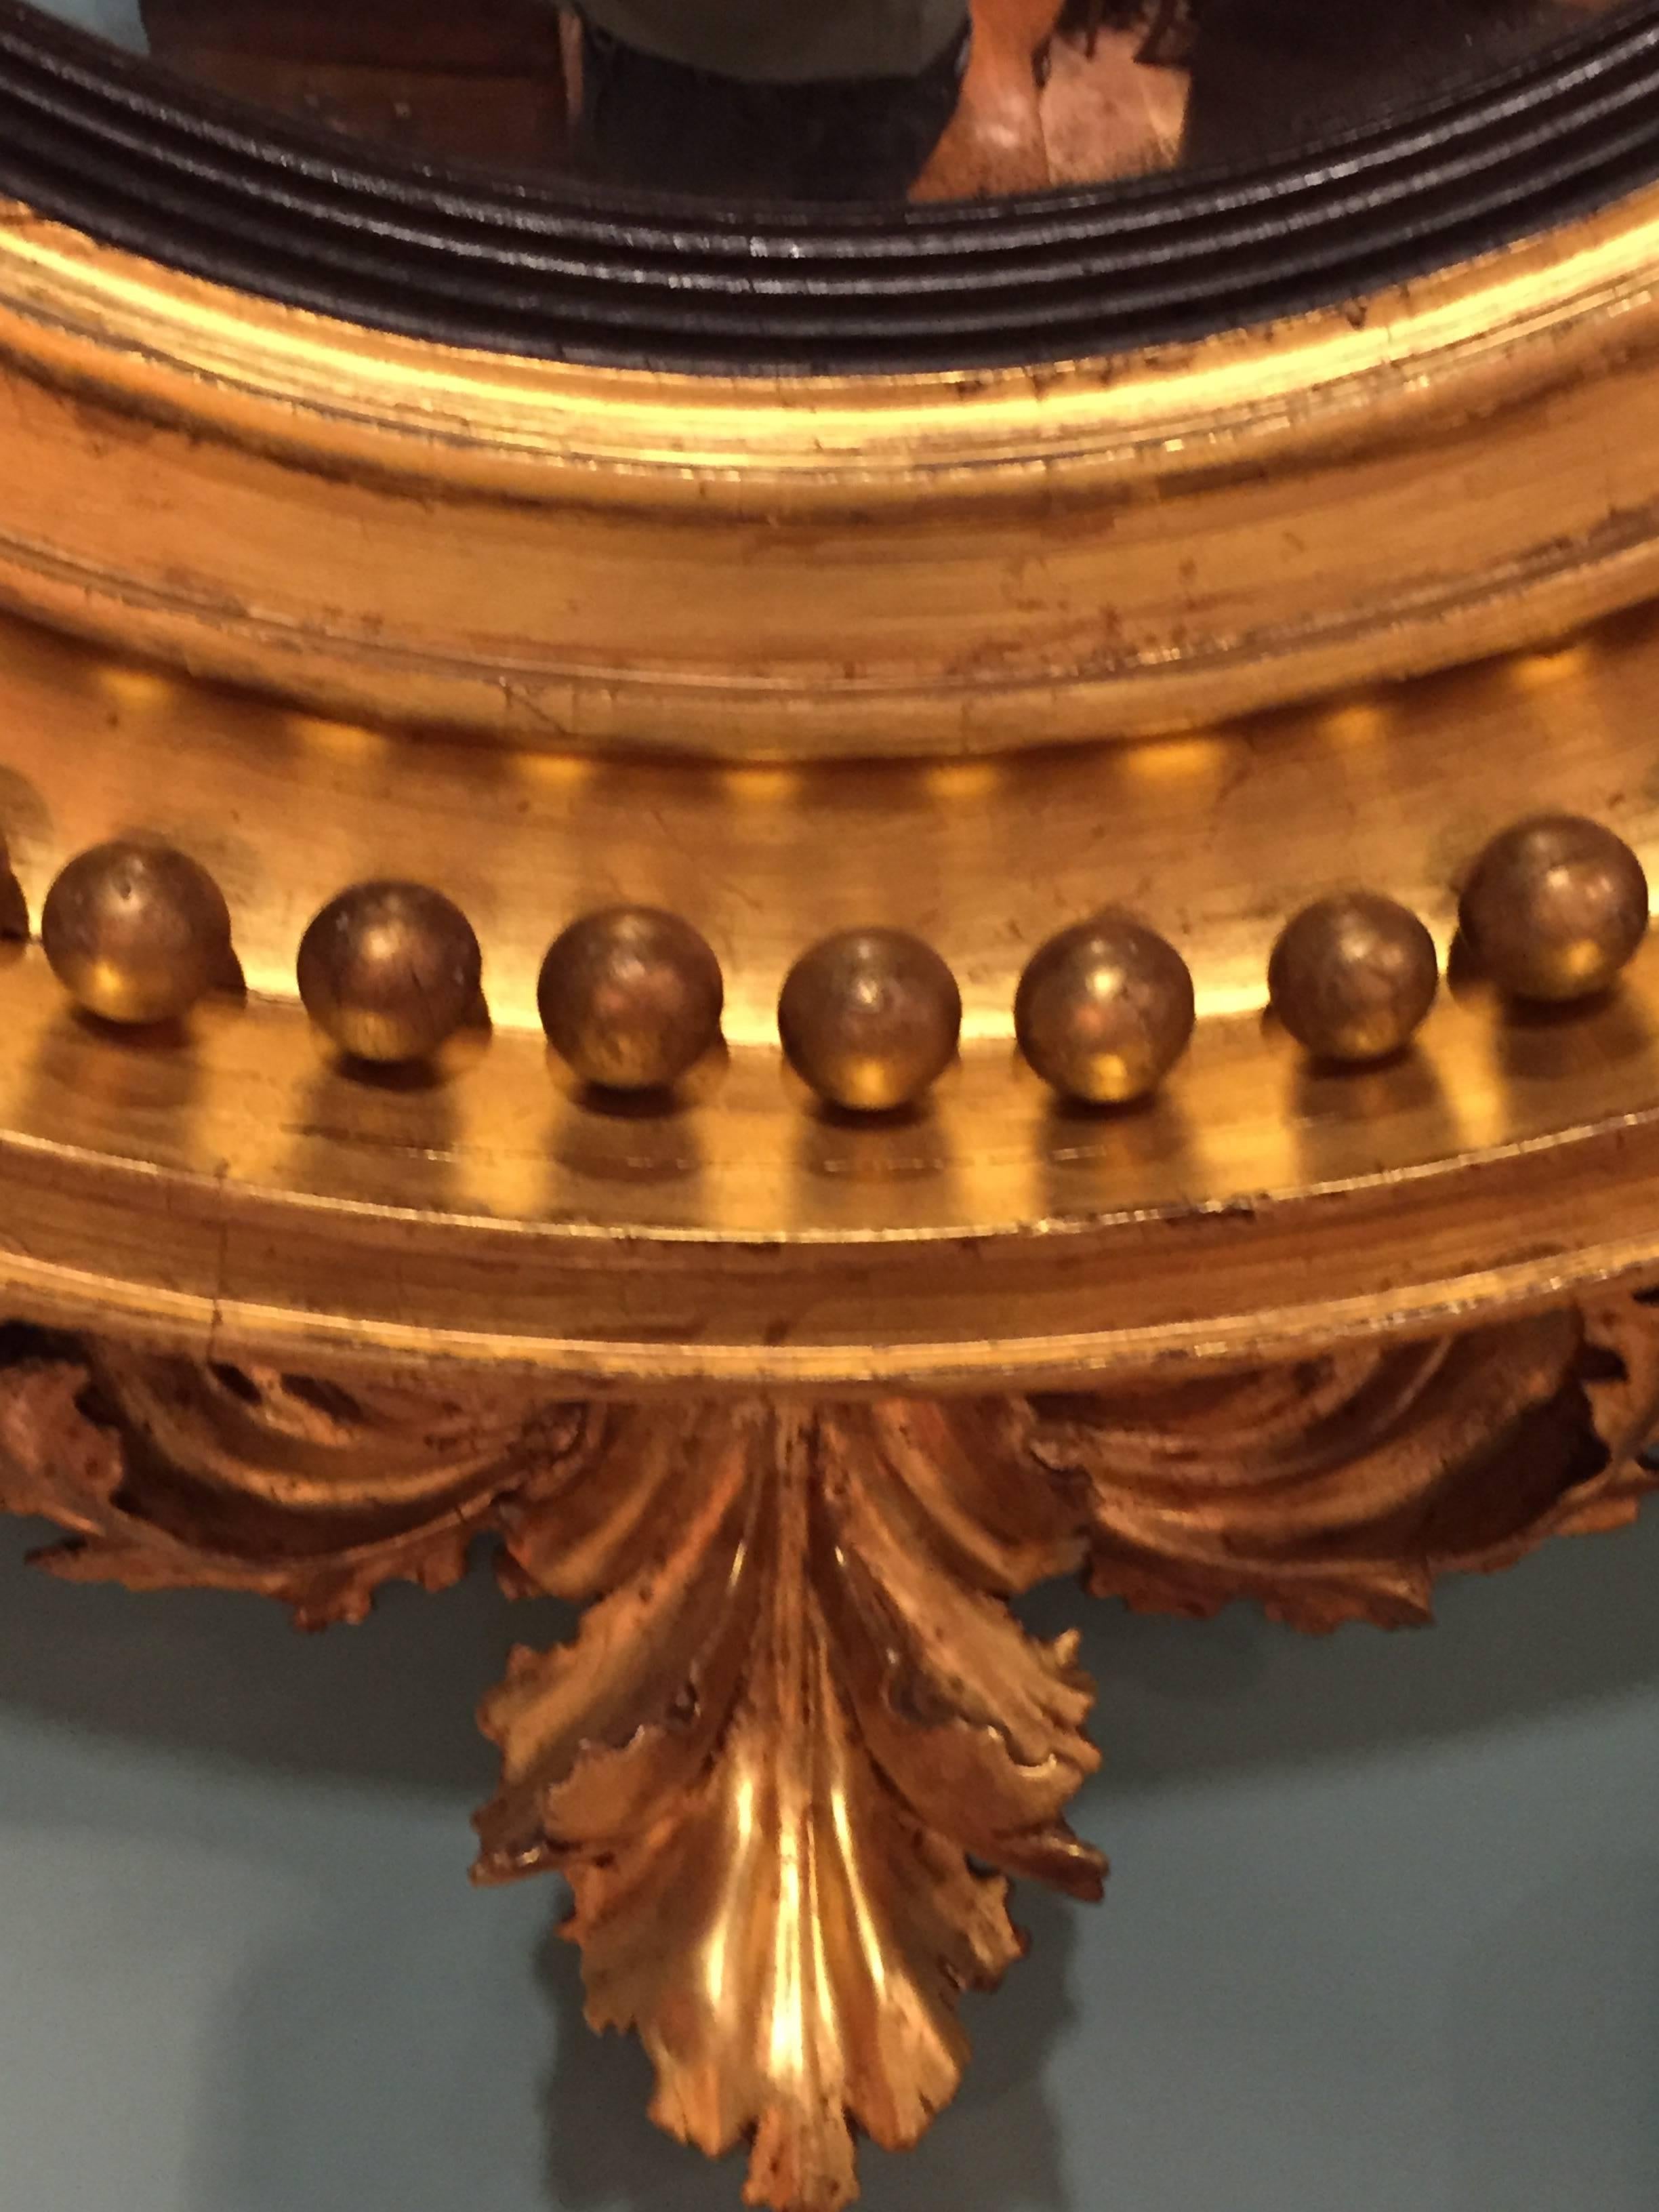 English or American large convex mirror carved of wood with gold gilt finish. Large eagle perched in foliage on top with same foliage continuing at bottom.